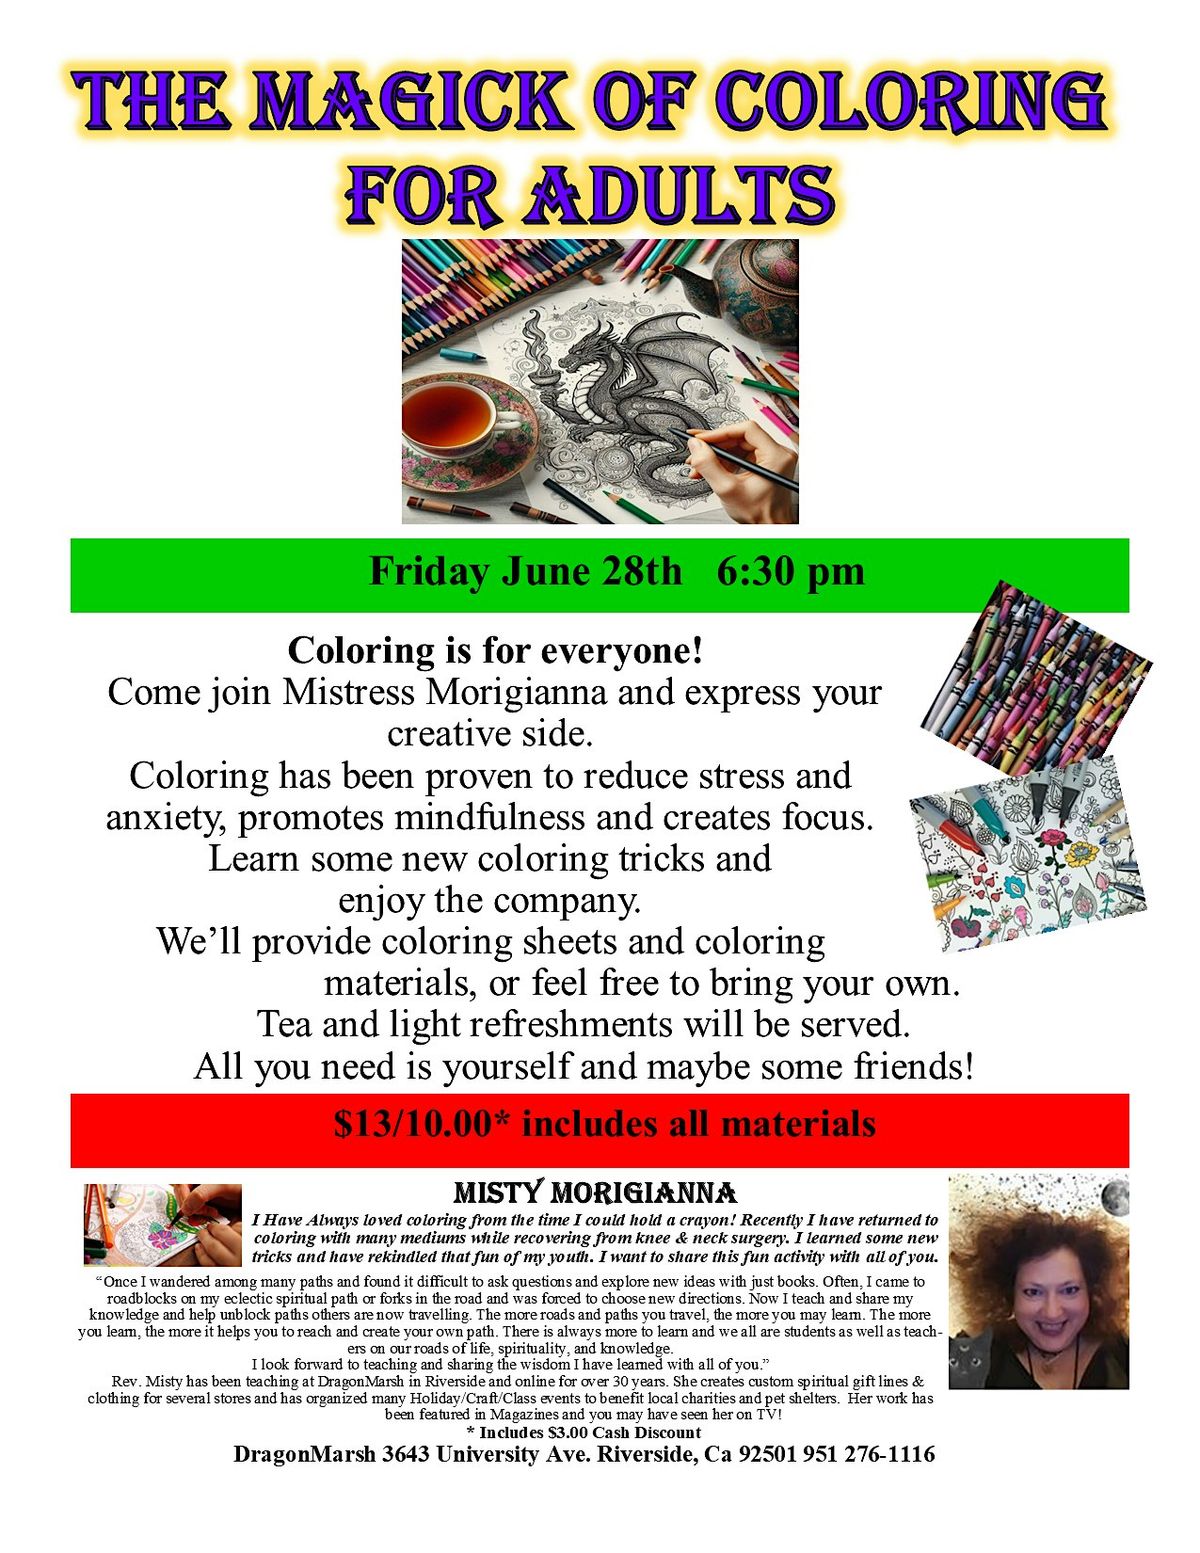 The Magick of Coloring for Adults $13\/10.00*